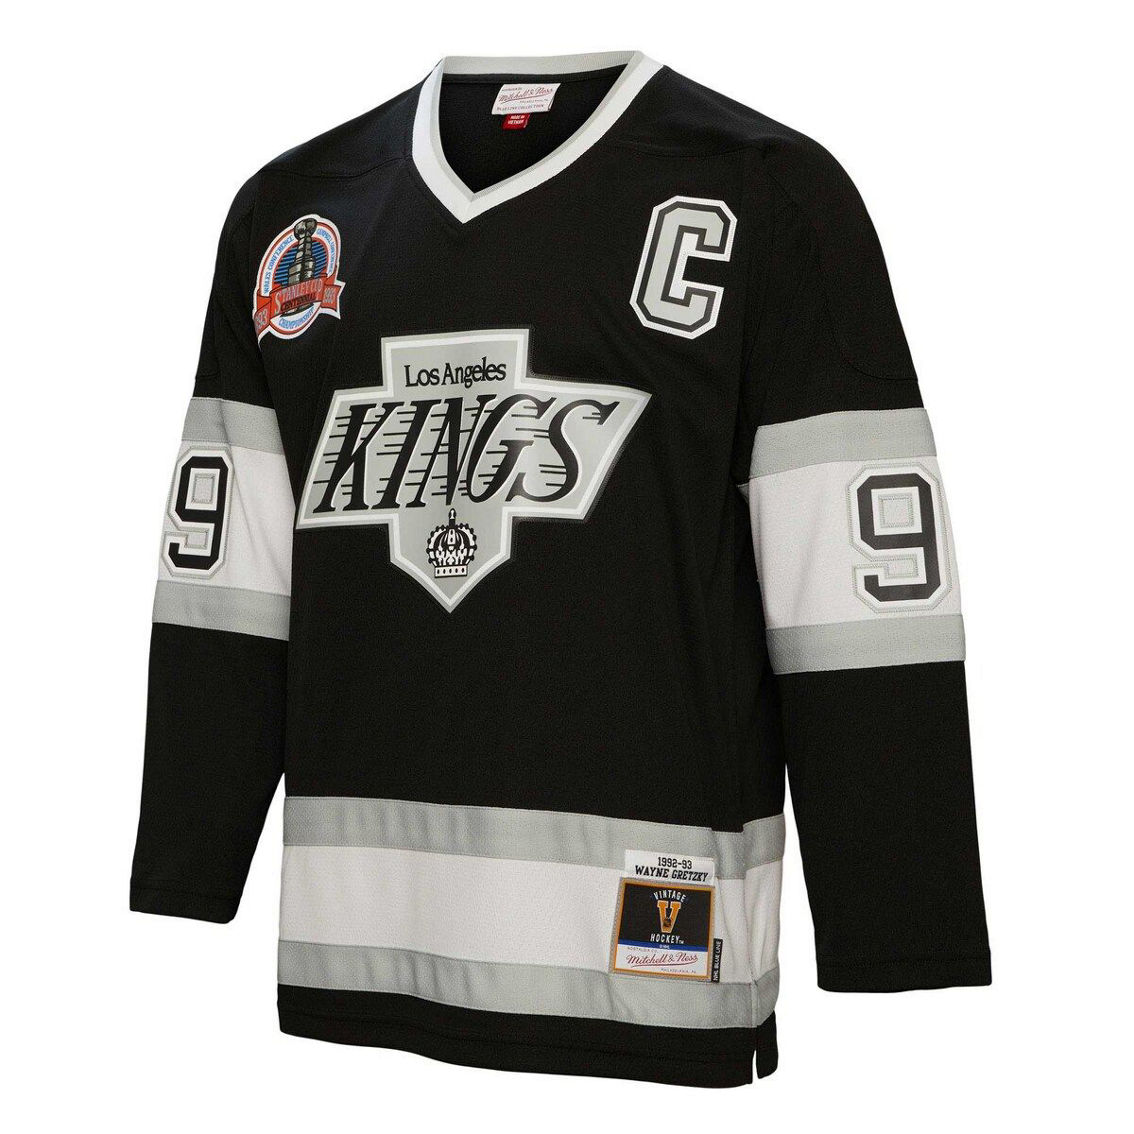 Mitchell & Ness Men's Wayne Gretzky Black Los Angeles Kings 1992/93 Captain Patch Blue Line Player Jersey - Image 3 of 4